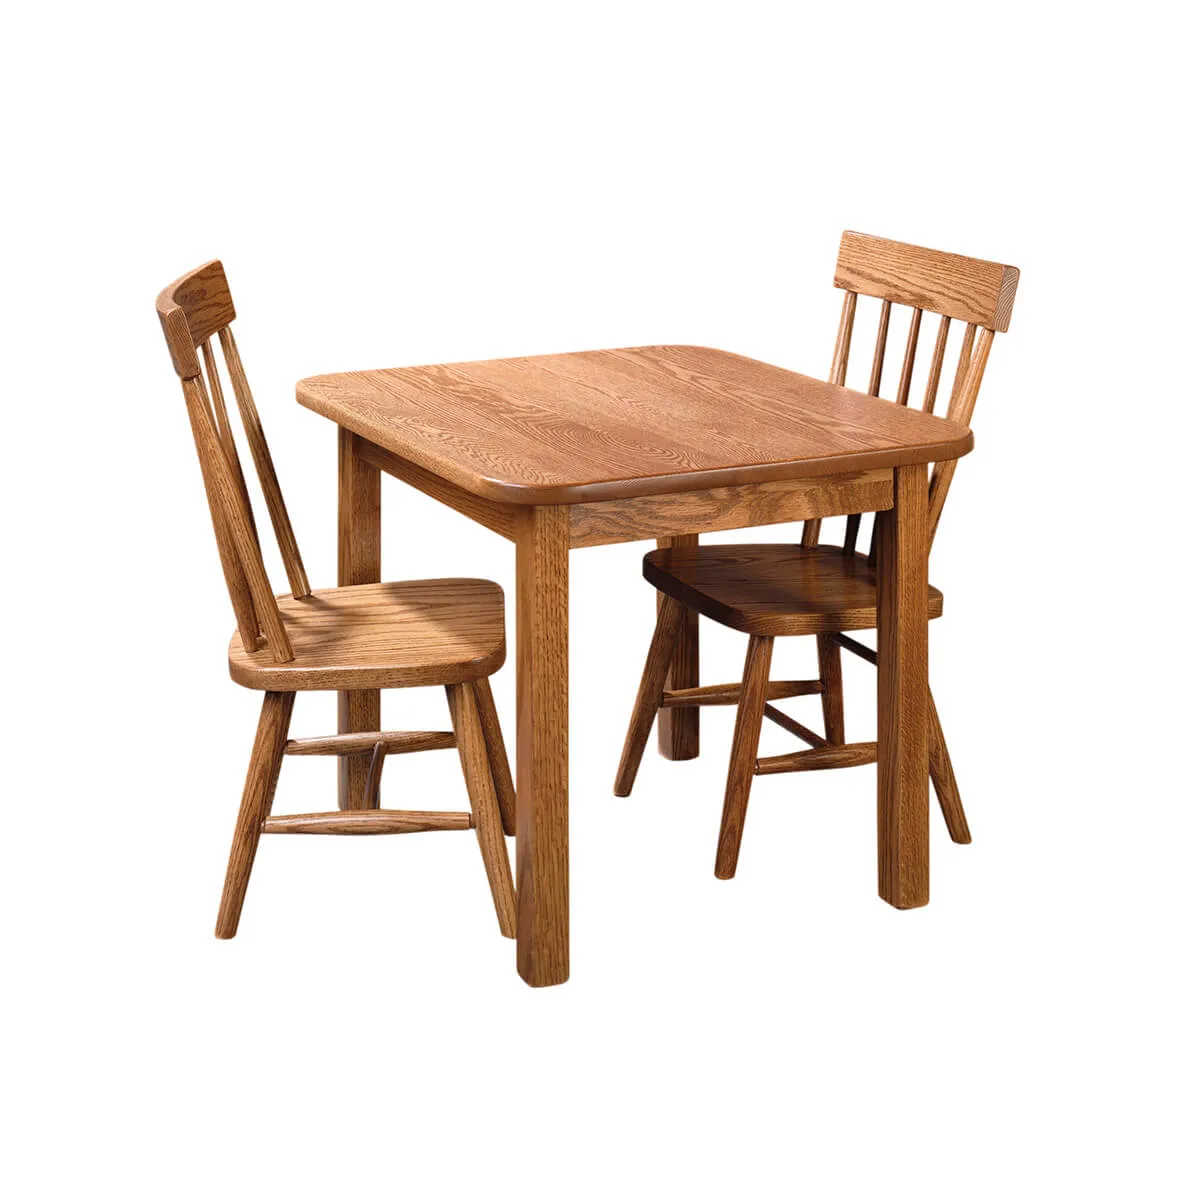 Child Table with Square Legs and Child Chairs